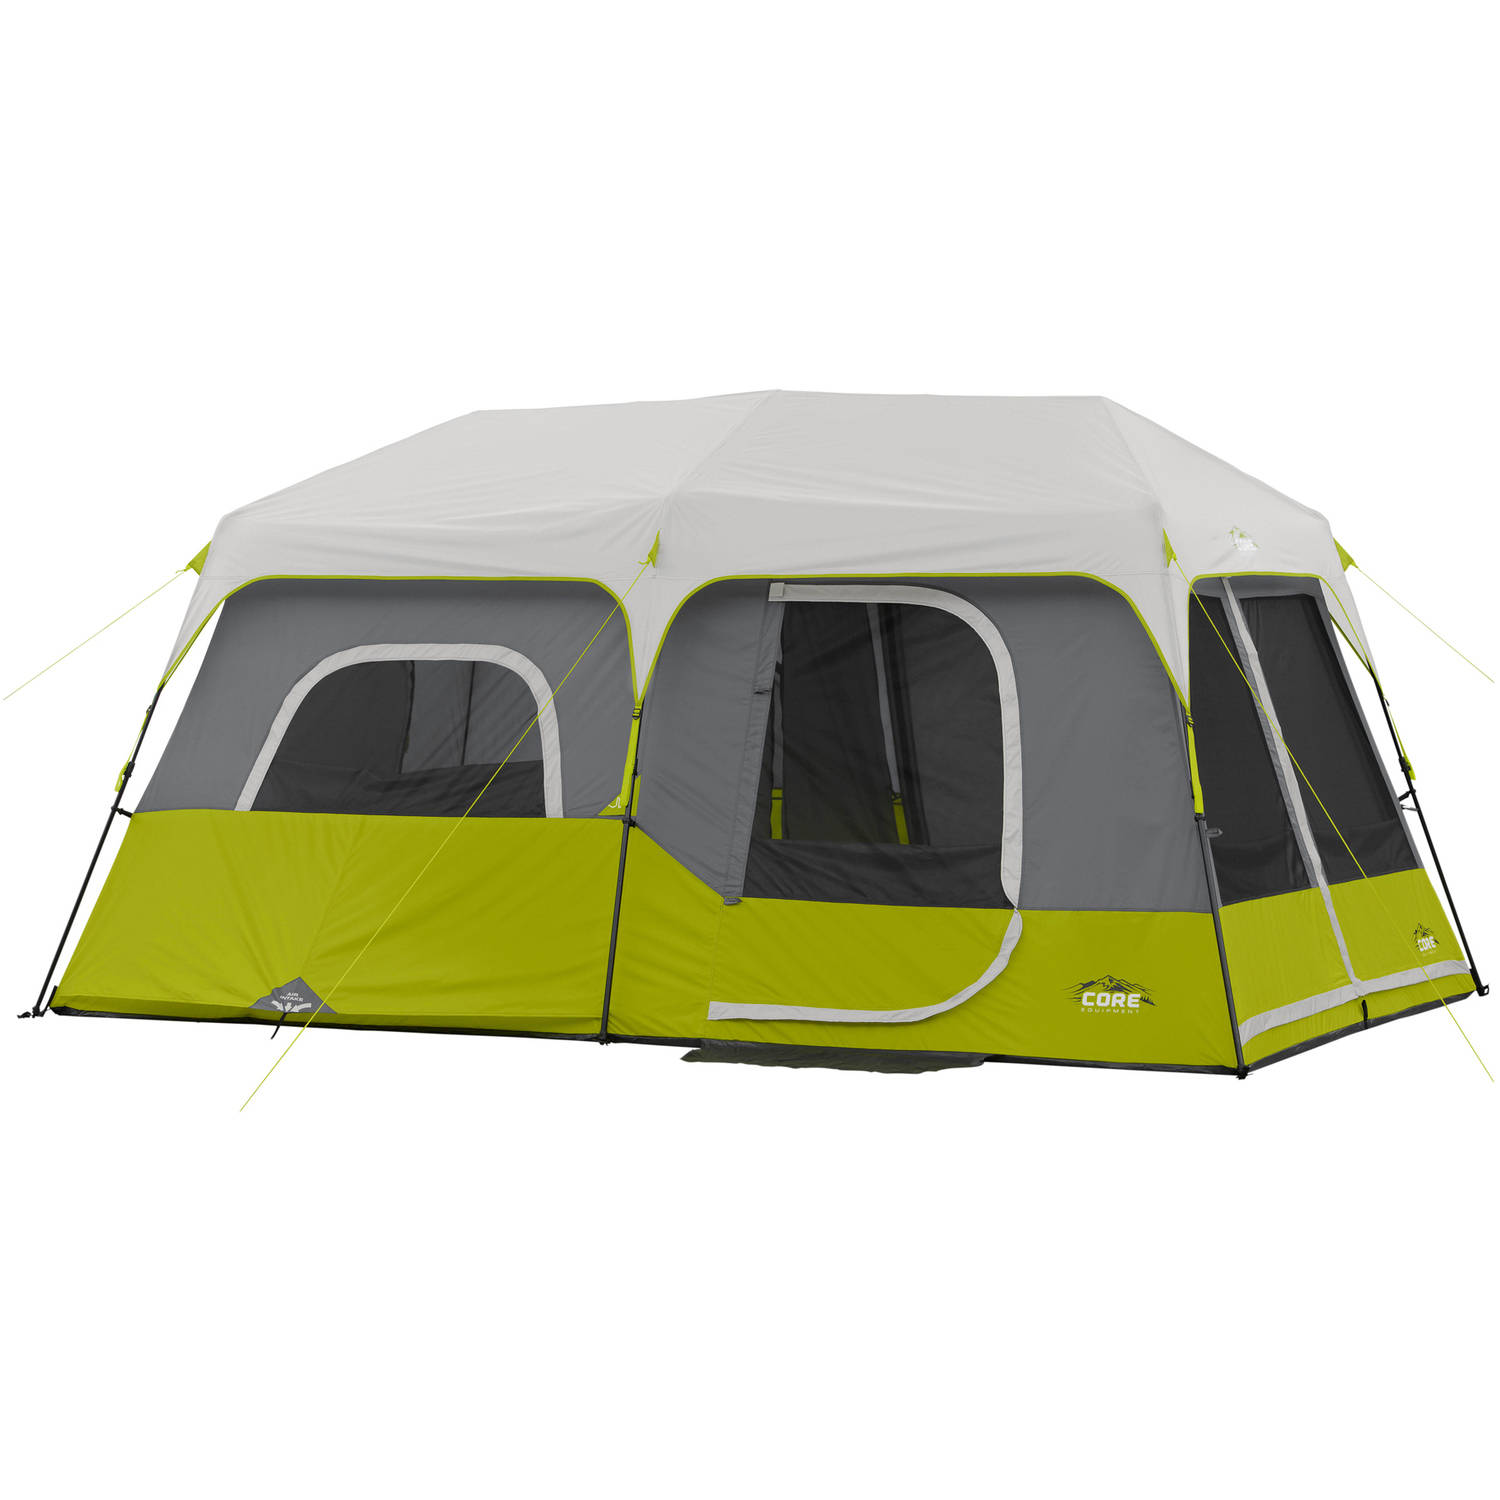 Core 9 Person Instant Cabin Tent - 14' x 9' - image 1 of 10